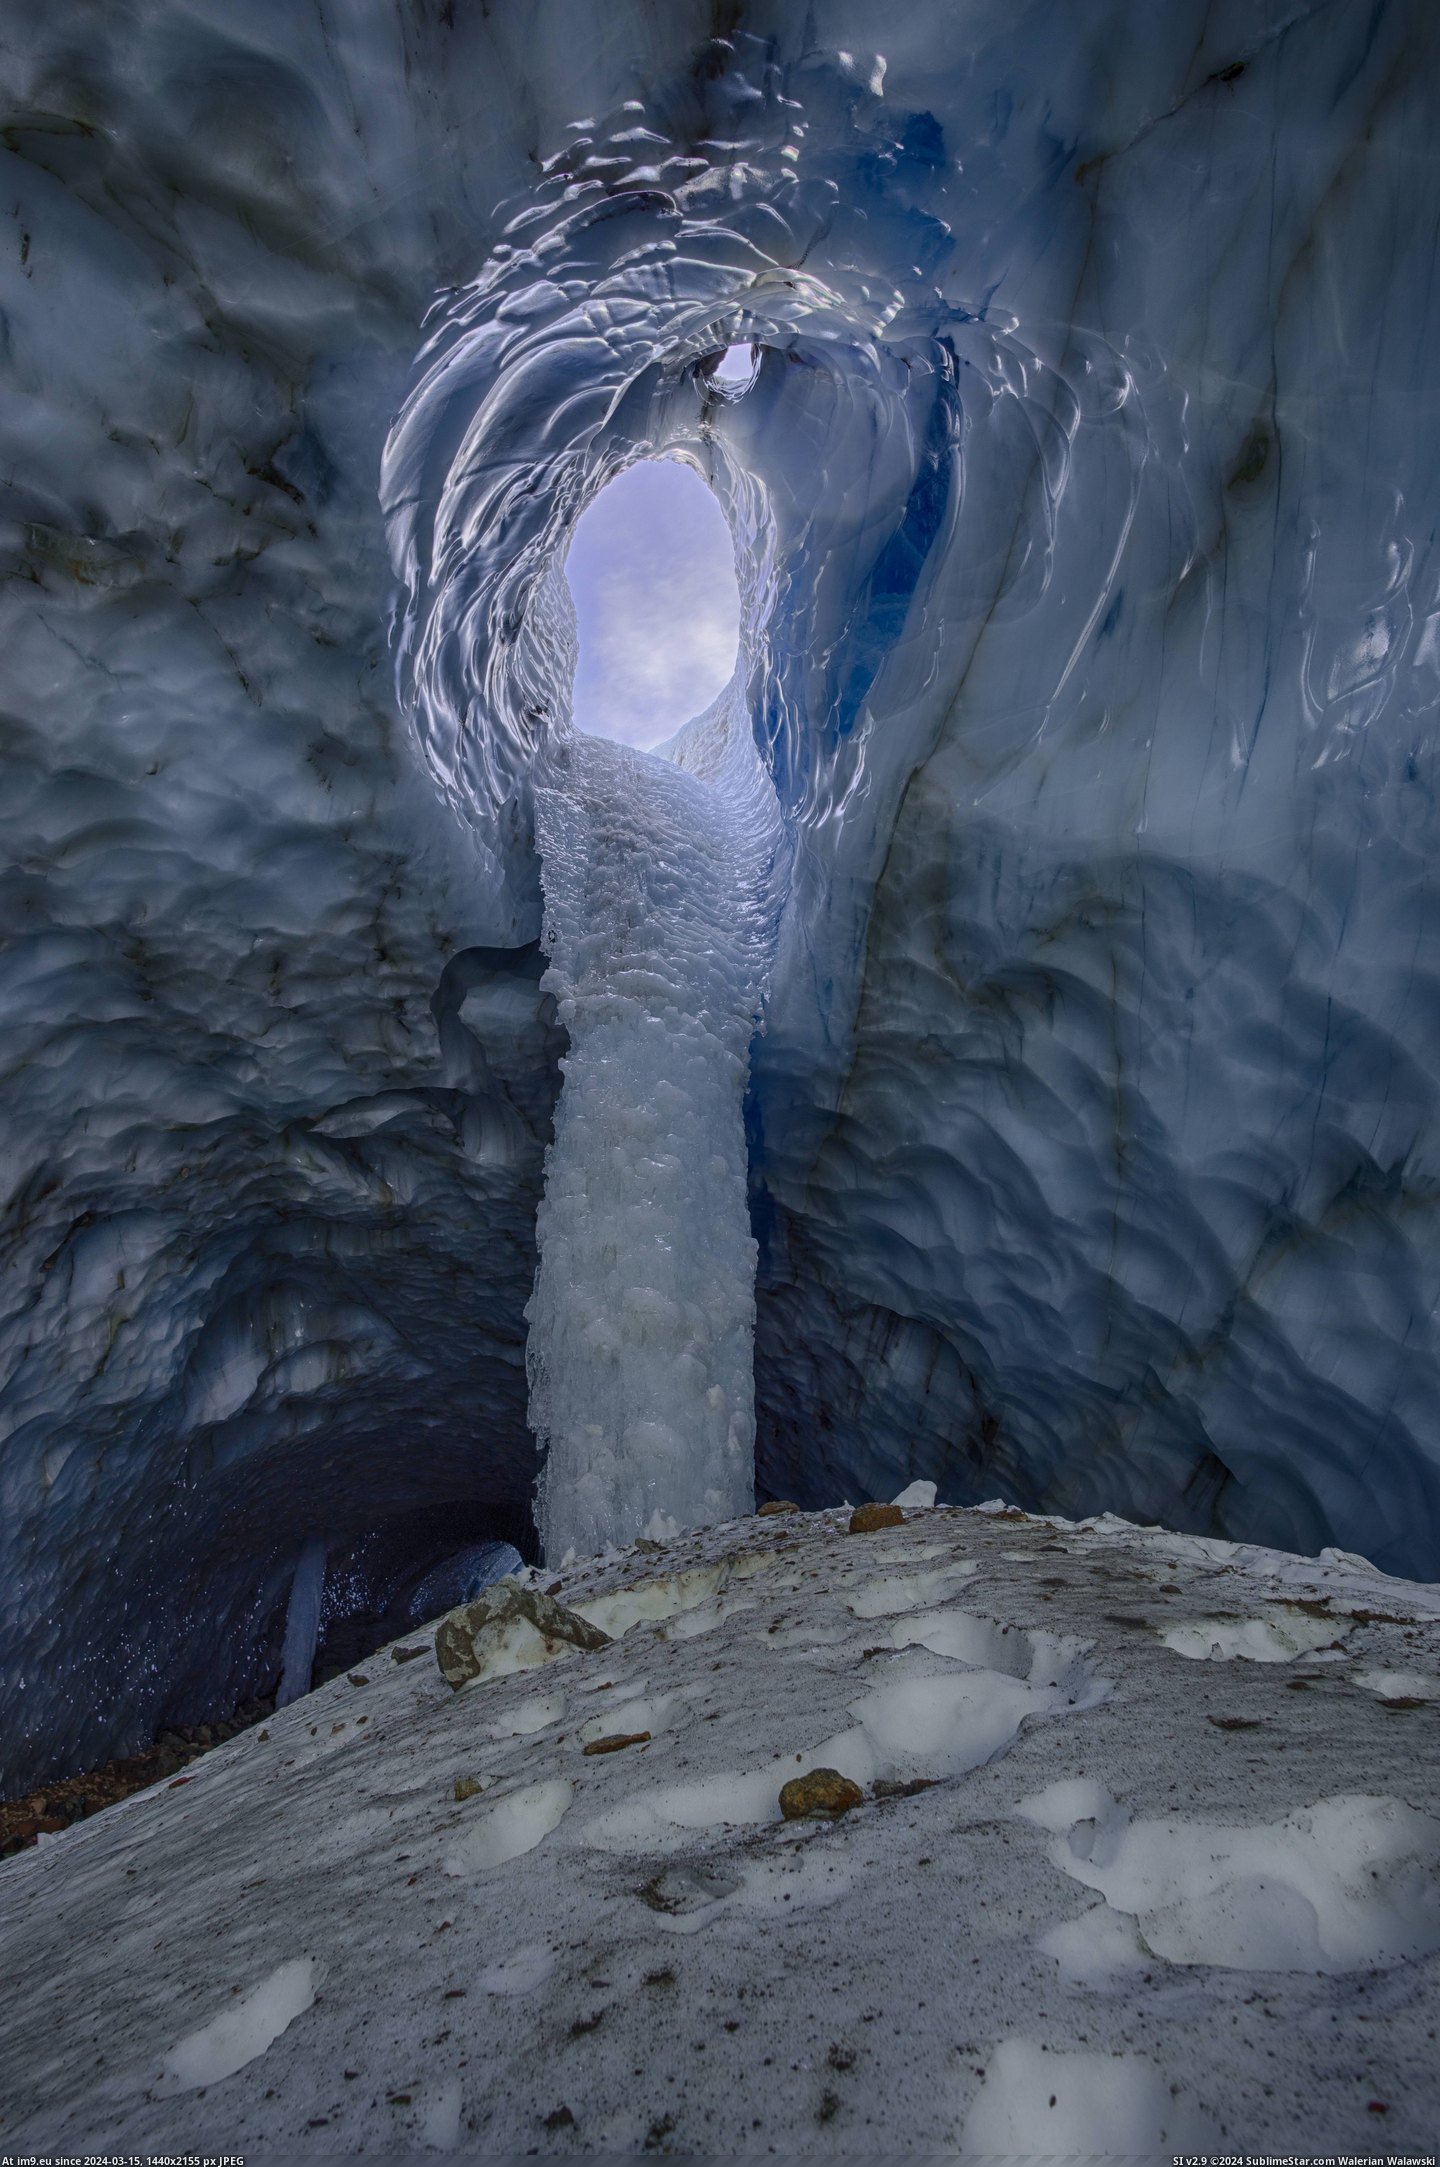 #Photo #Oregon #Waterfall #Hood #Cave #Glacier #Frozen [Earthporn] A view to the outside through a frozen waterfall inside a glacier cave on Mt. Hood, Oregon  [4009x6011] Photo by: Ja Pic. (Image of album My r/EARTHPORN favs))